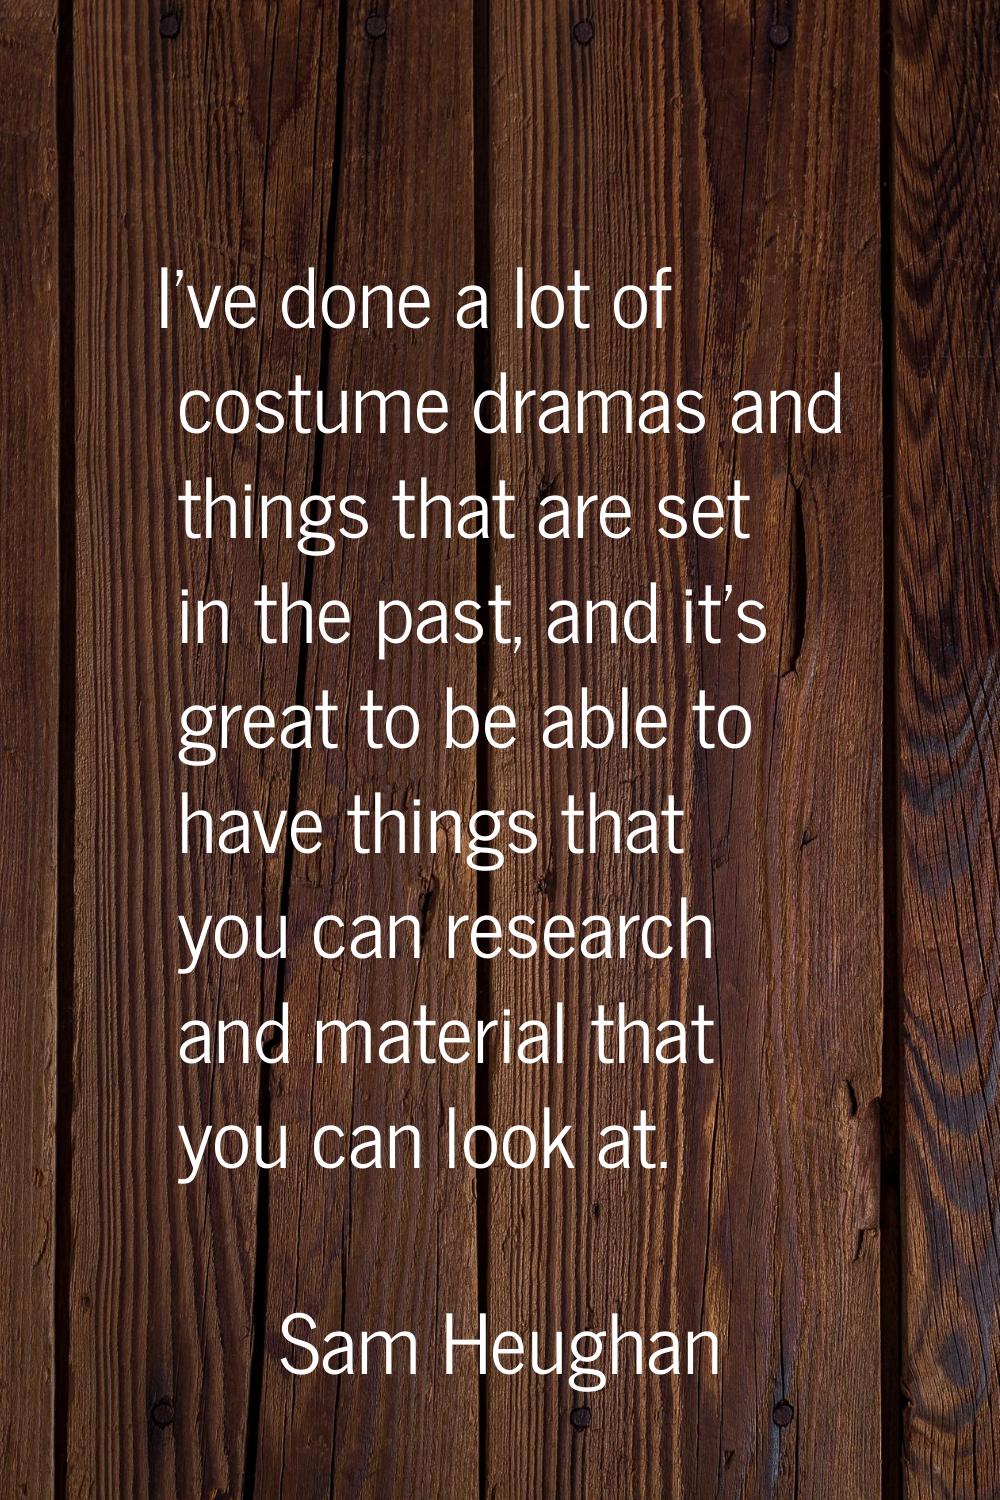 I've done a lot of costume dramas and things that are set in the past, and it's great to be able to